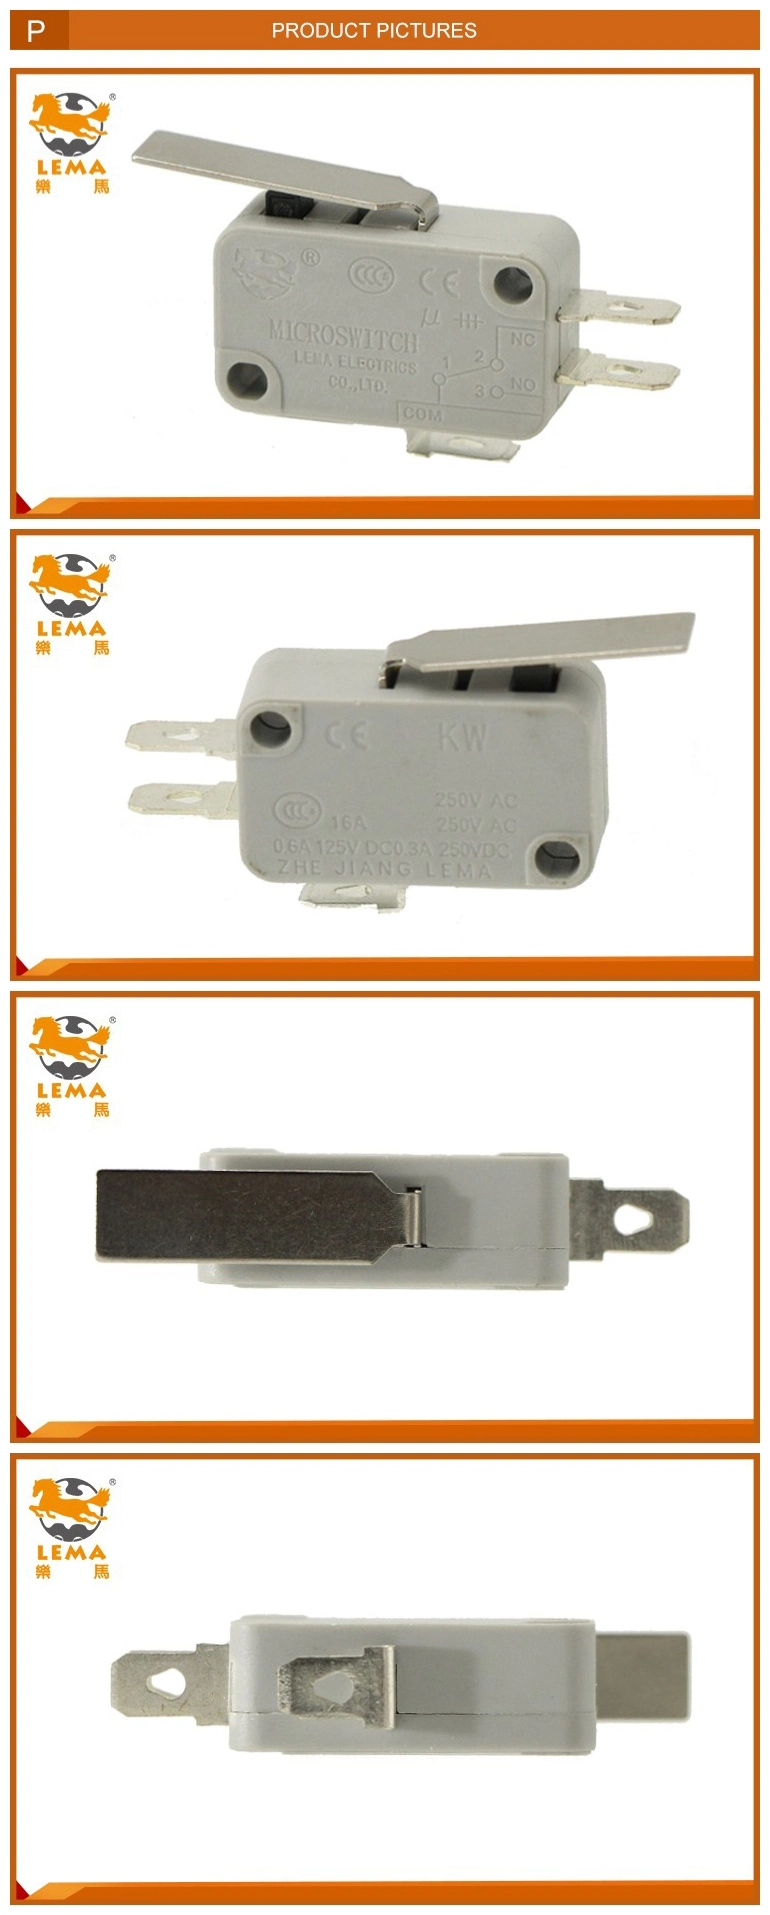 Lema Kw7-1I Grey Lever Sensitive Micro Switch Electronic Micro Switch